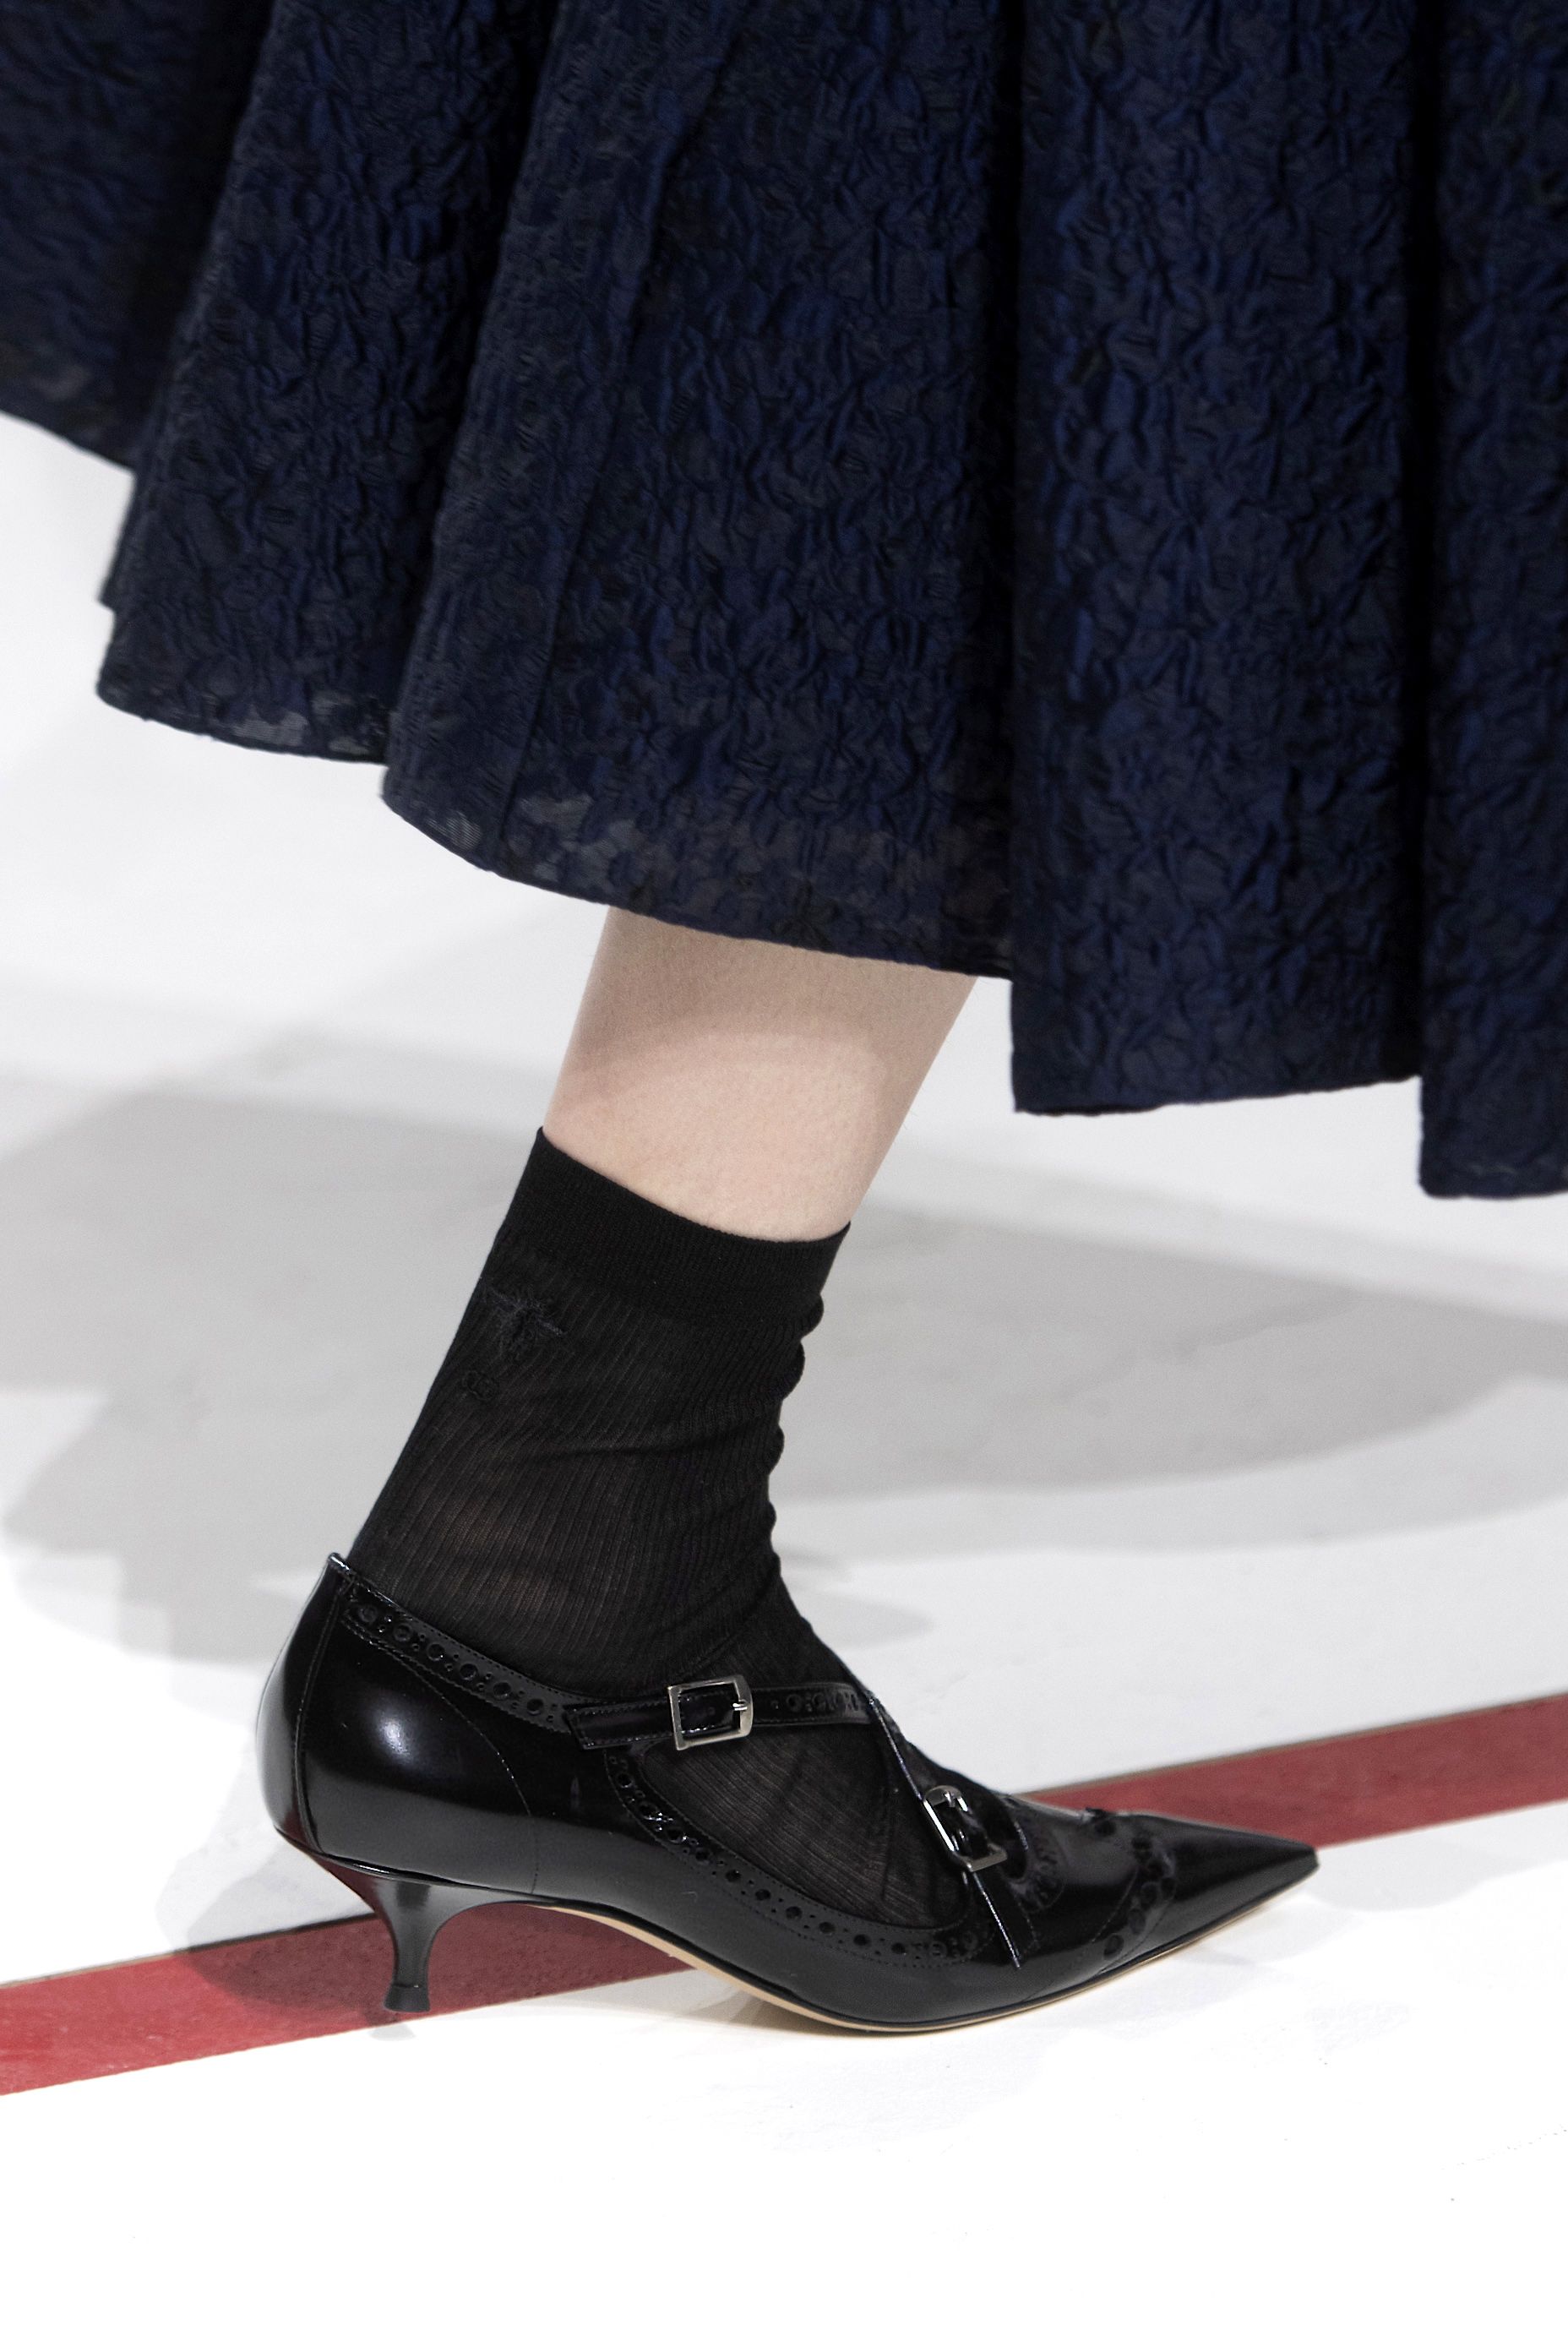 aw19 shoe trends